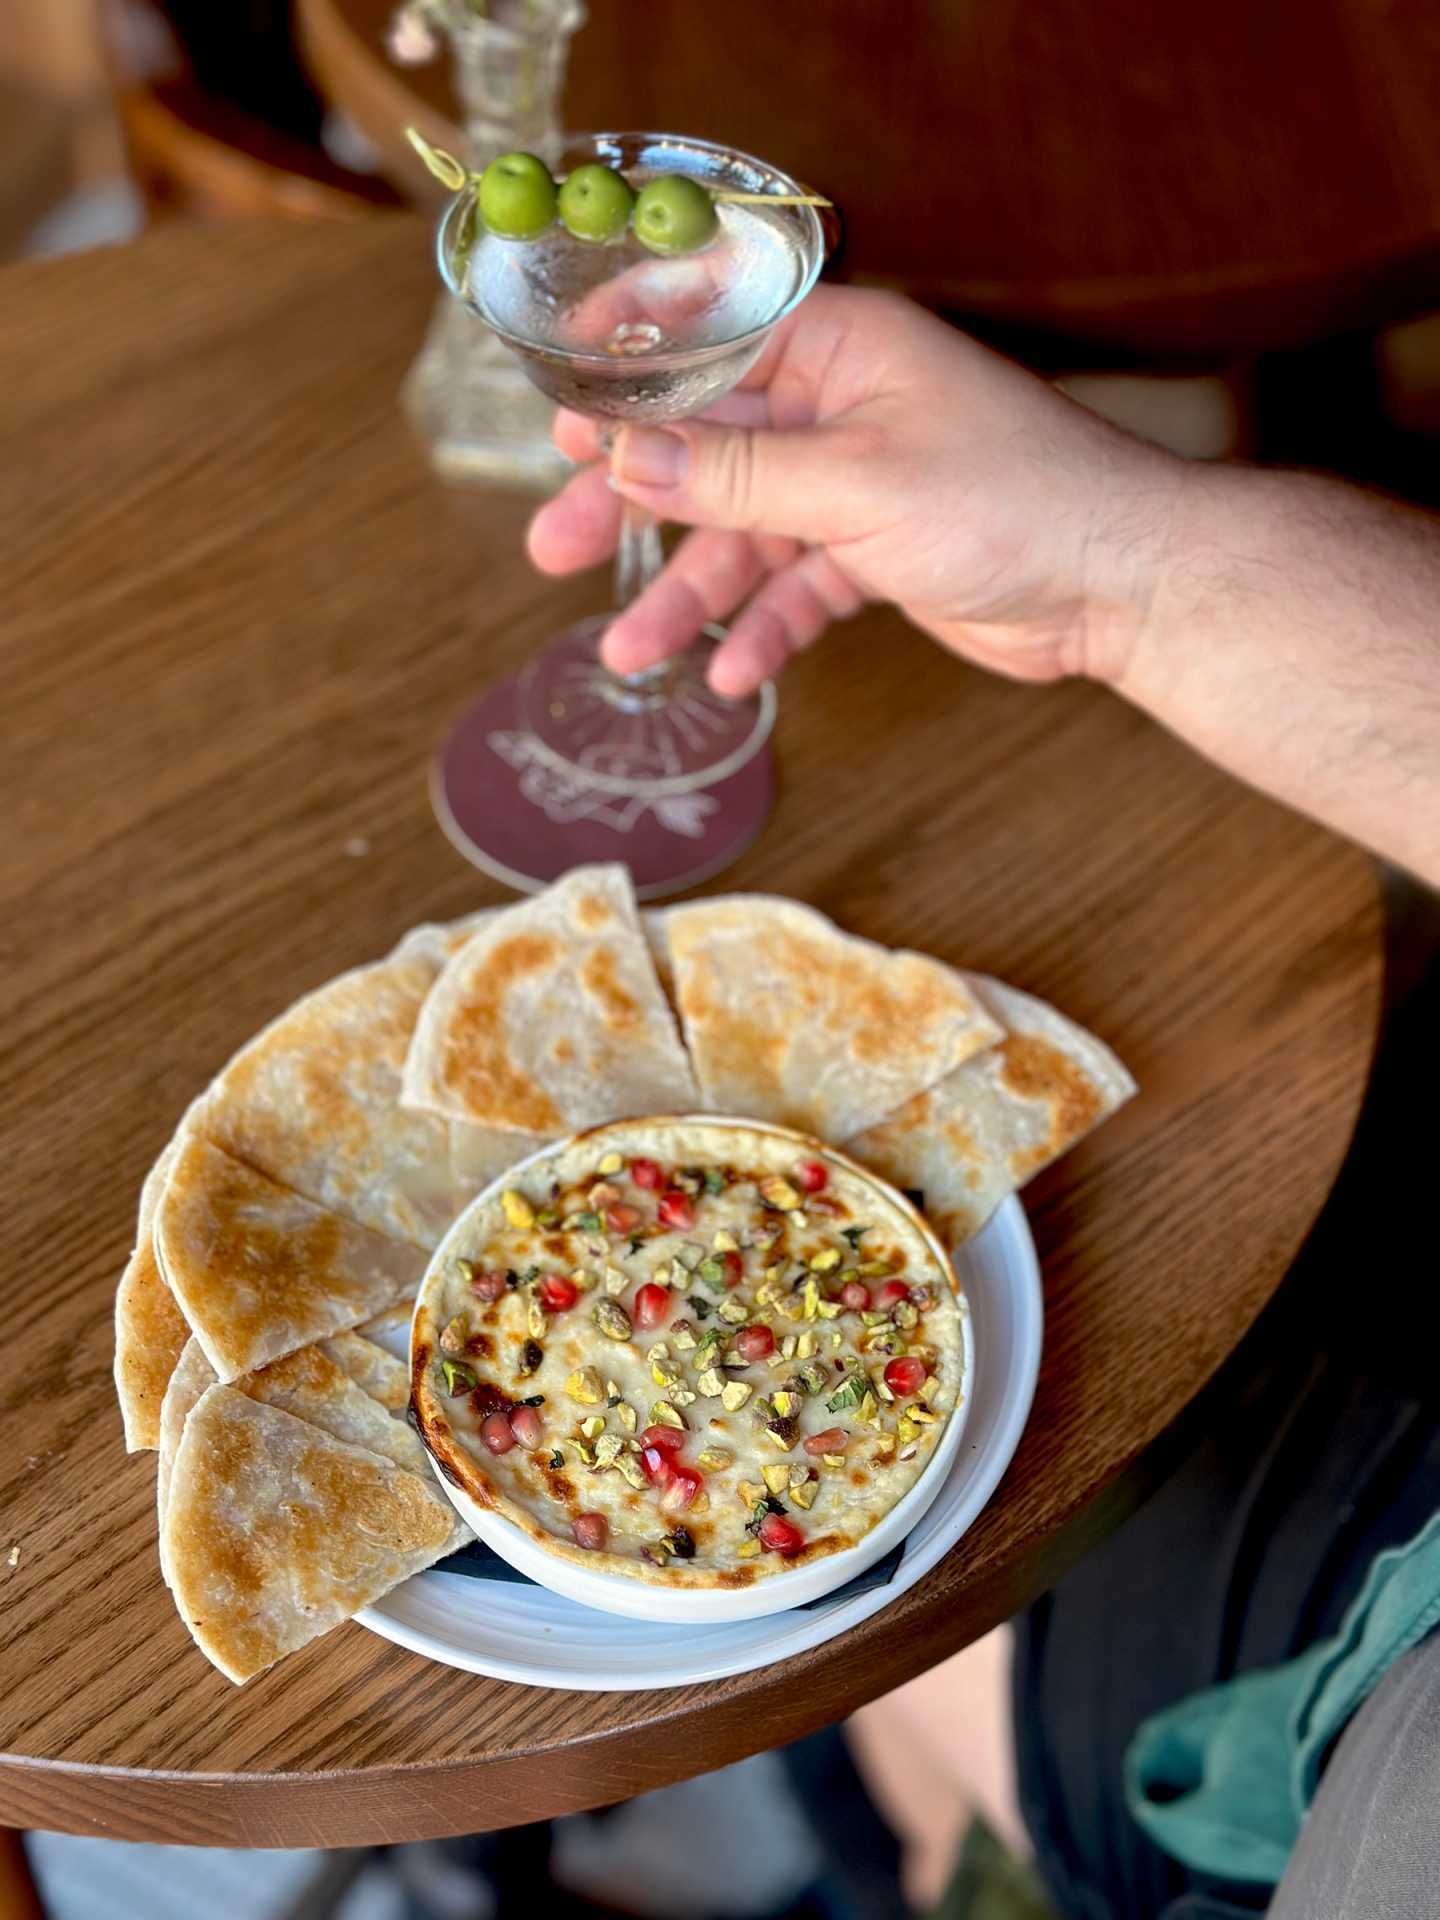 Best new restaurants Toronto | A colourful dip with pita bread, paired with a martini at Wolfie